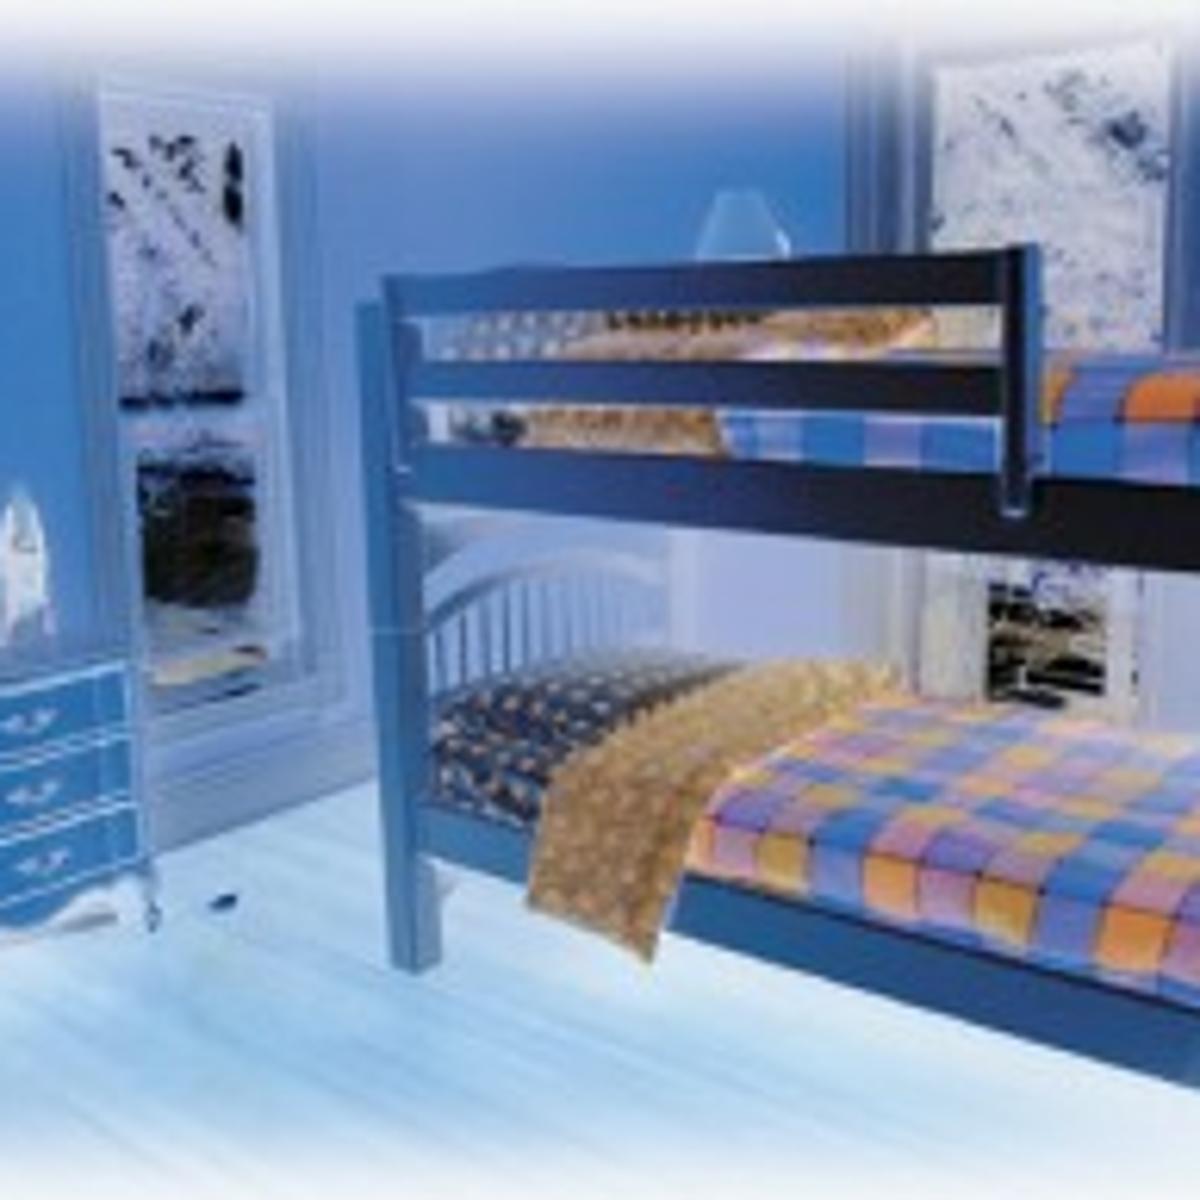 Bunk Beds Can Come With A Surprising, Bunk Bed Loft Columbus Ohio